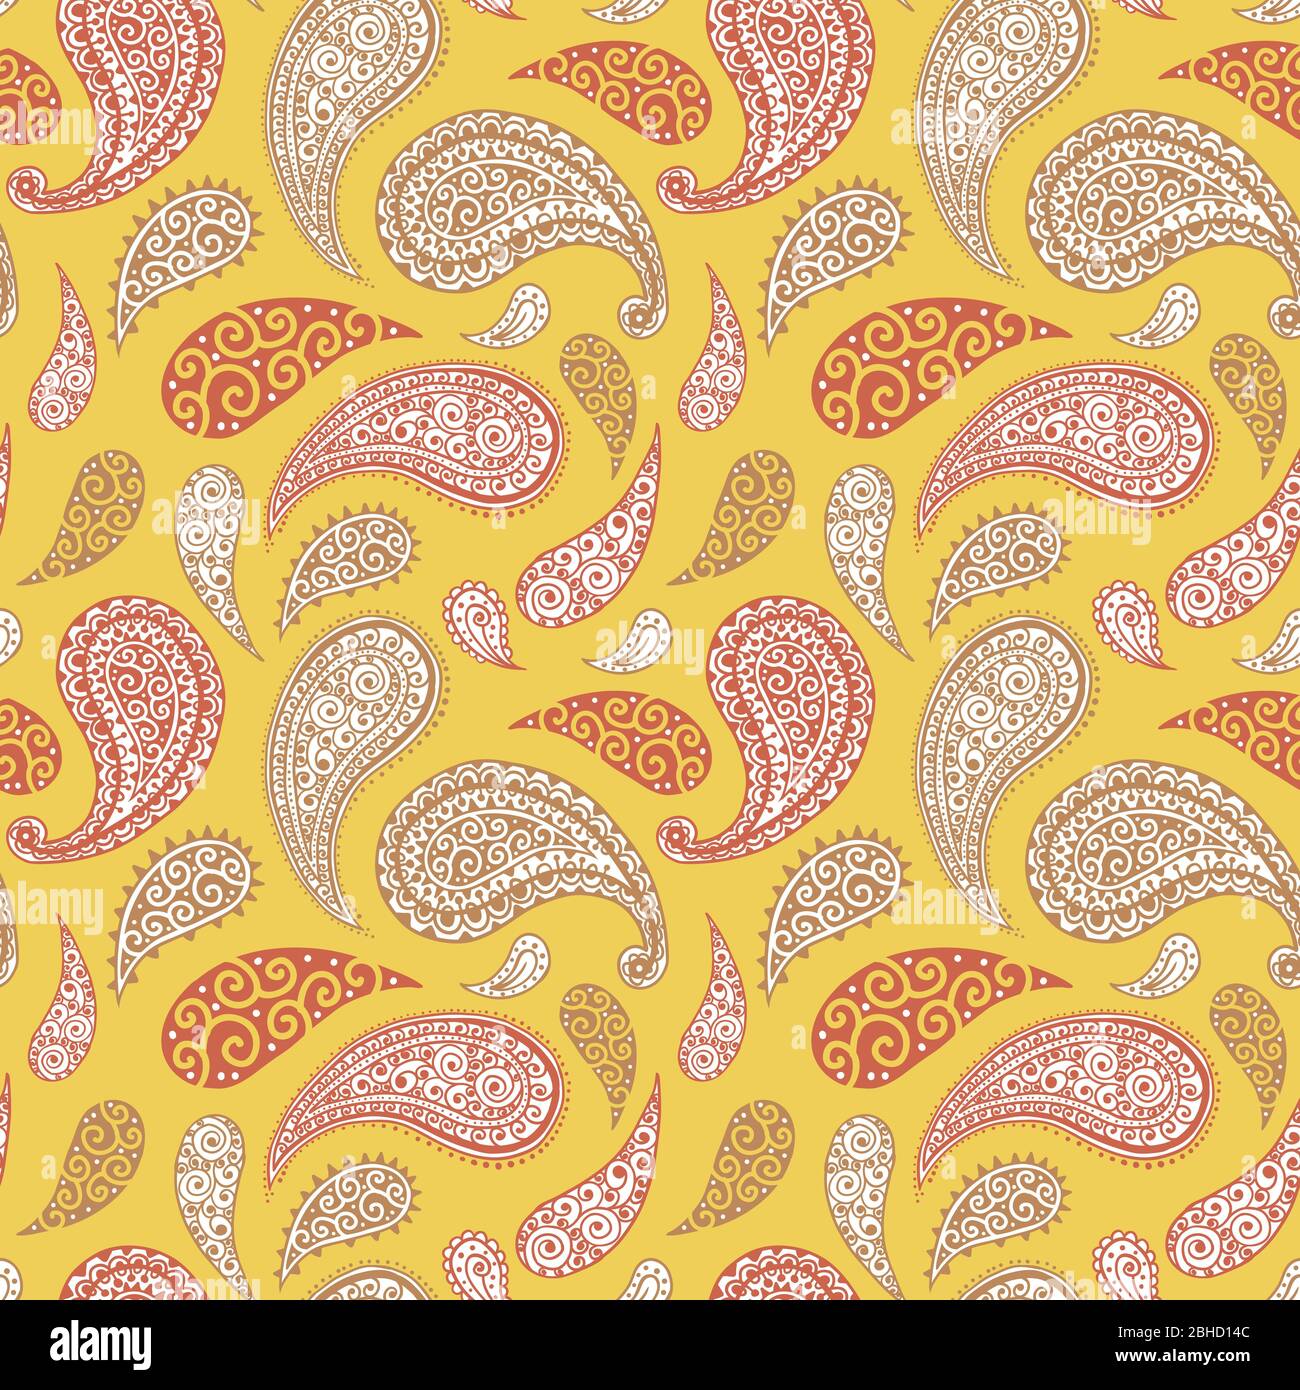 simple colorful paisley pattern